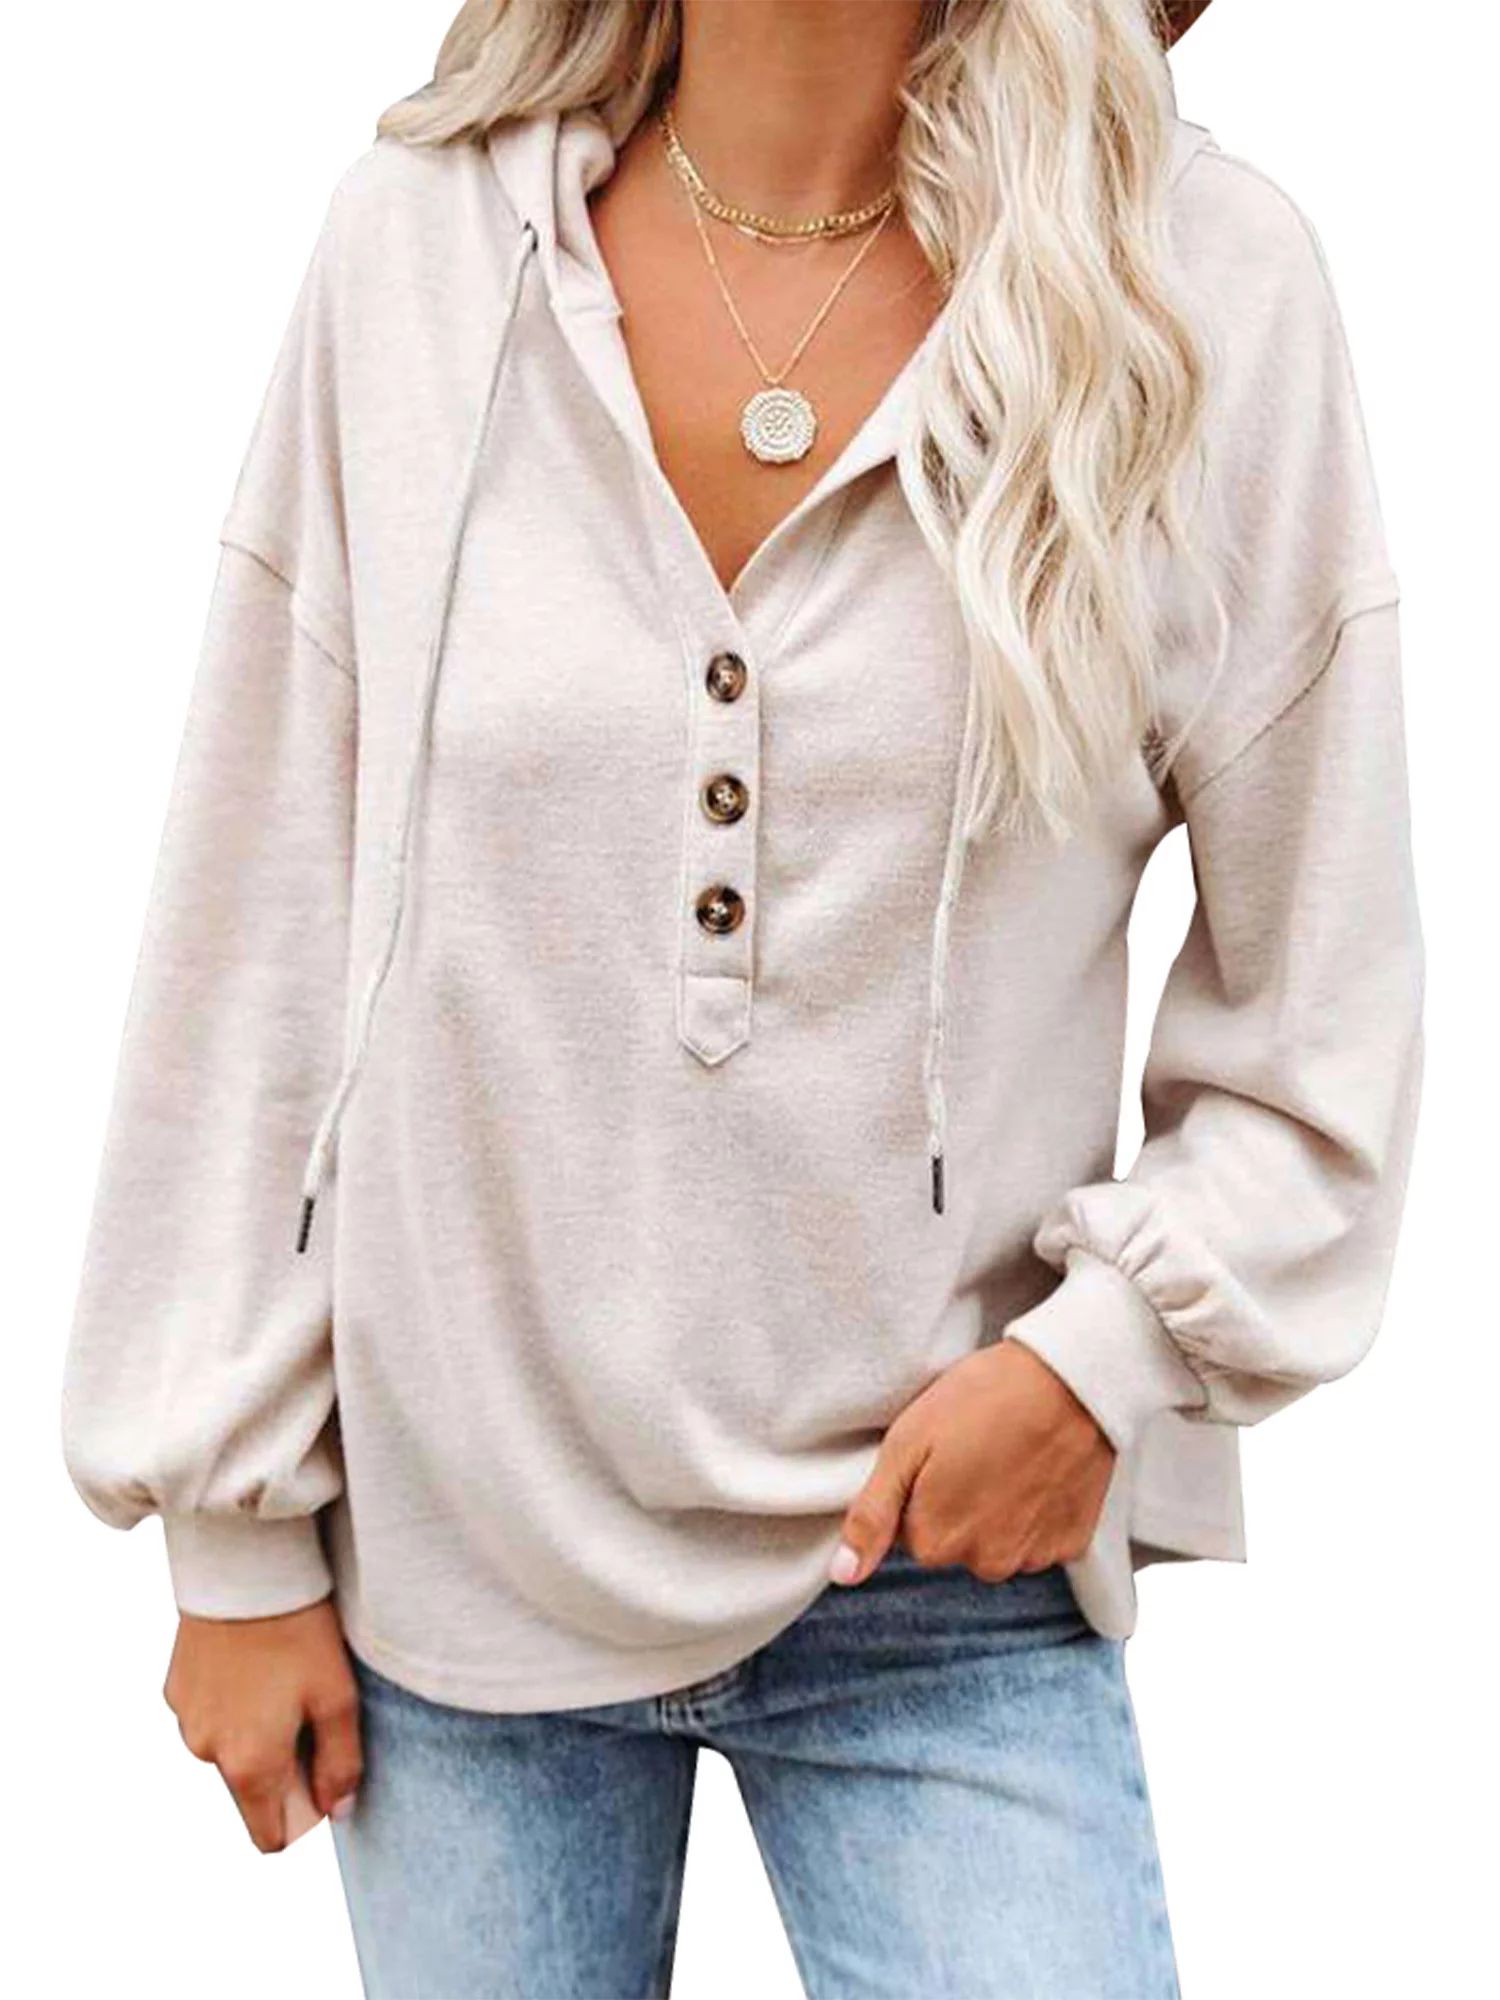 Avamo Women Casual Button Up Hooded Sweatshirt Solid Color Pullover Loose Tunic Tops Blouse Plus ... | Walmart (US)